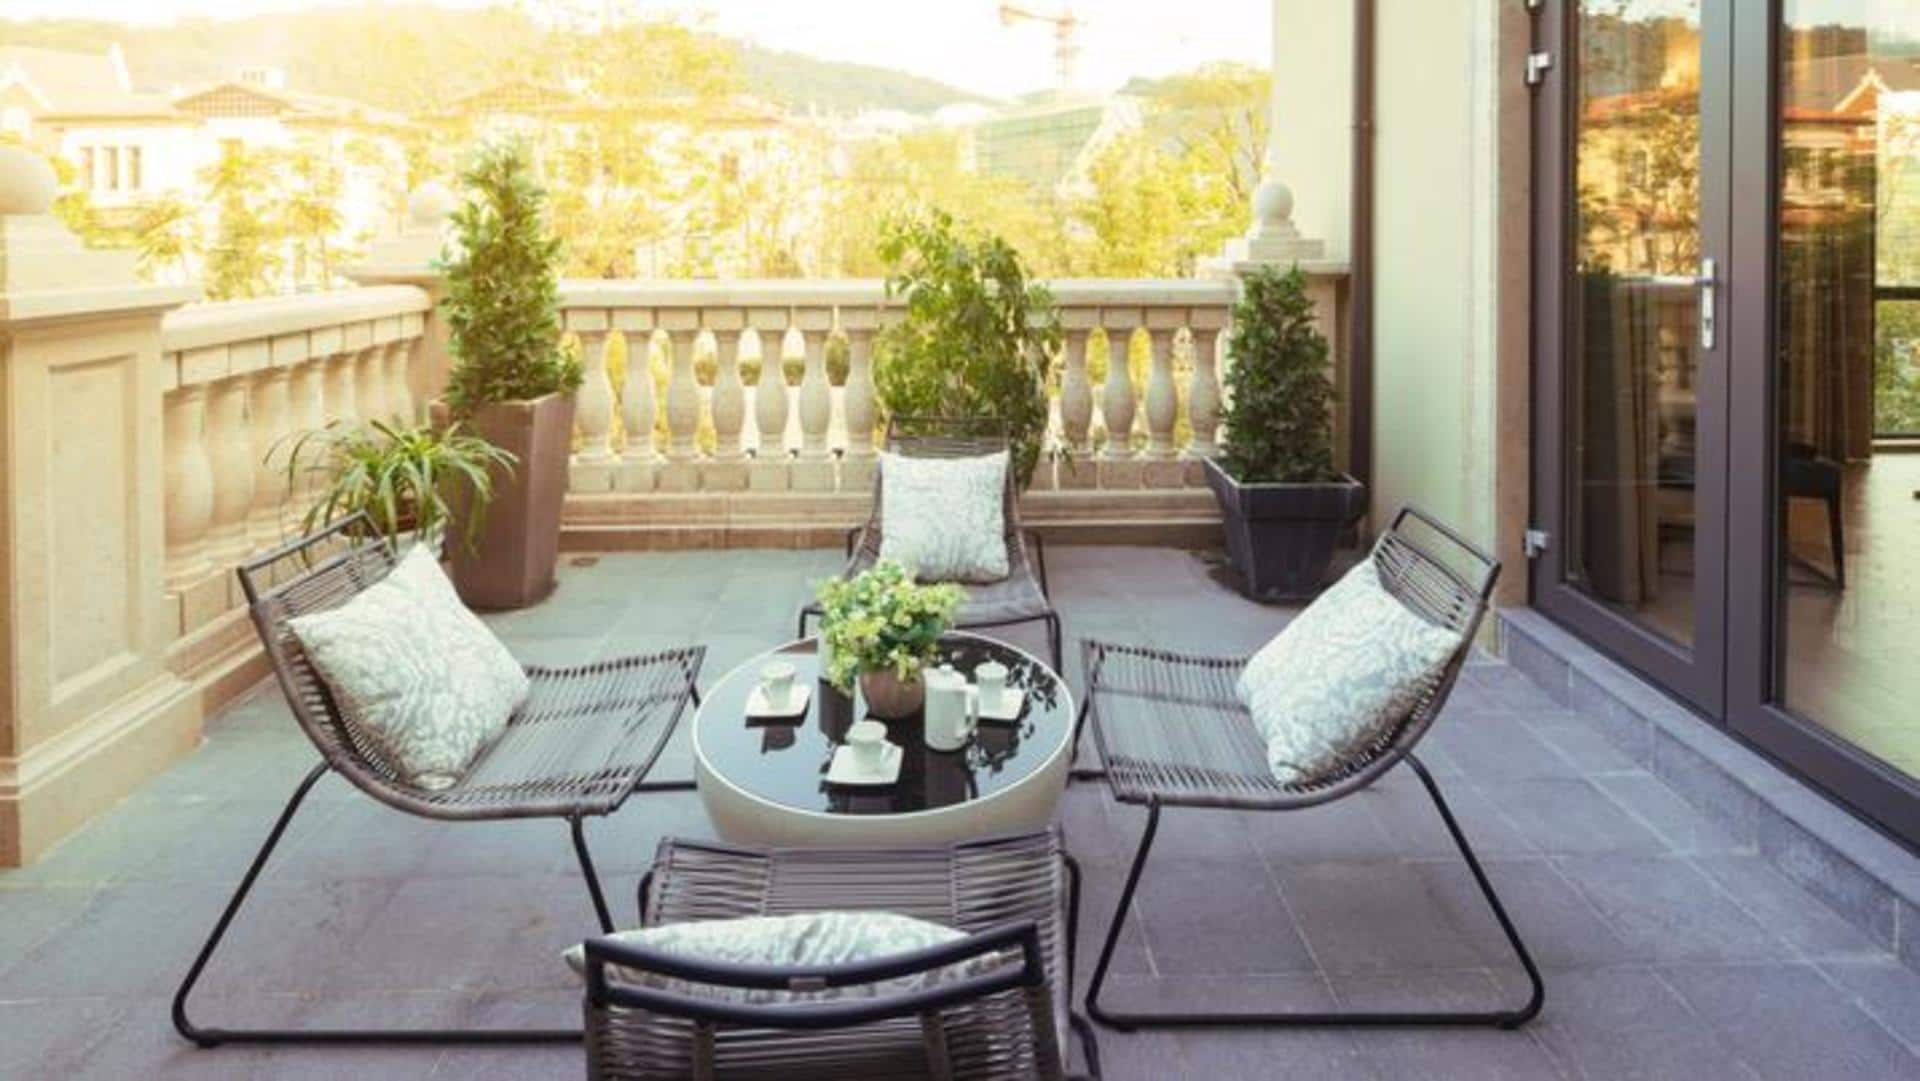 Here's how you can maintain a neat and clean balcony